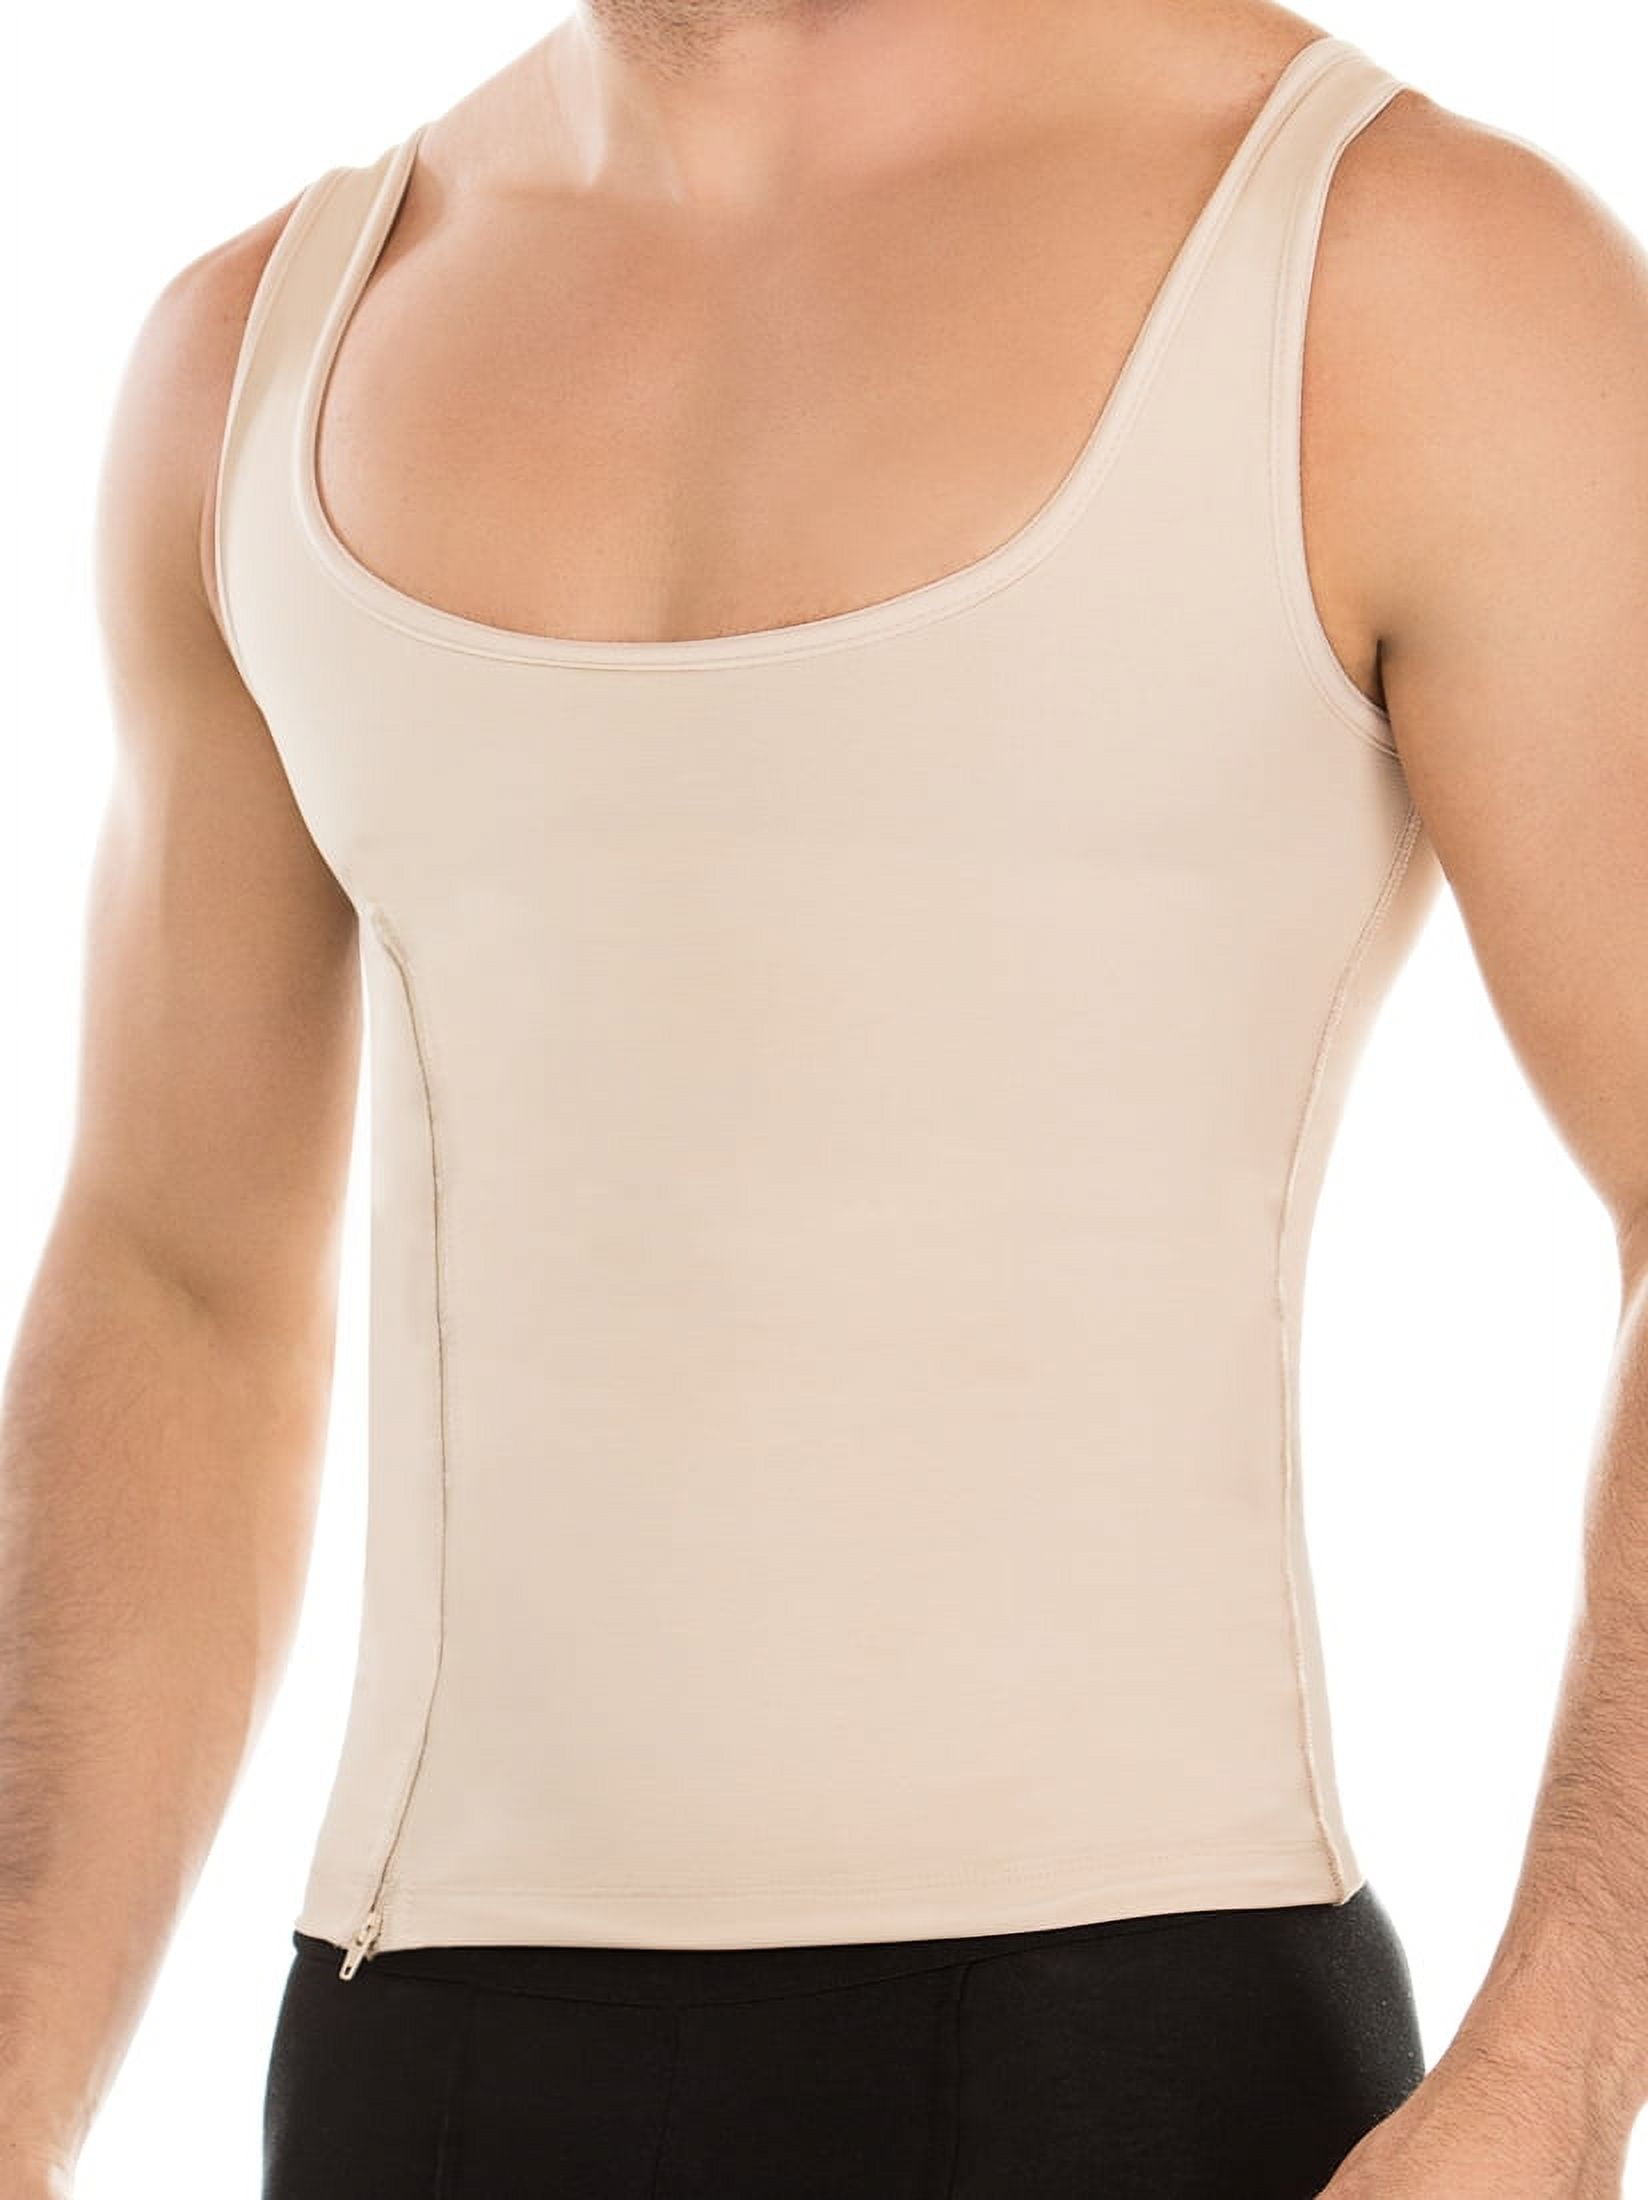 Premium Girdle for Men Fajas Colombianas Fresh and Nepal